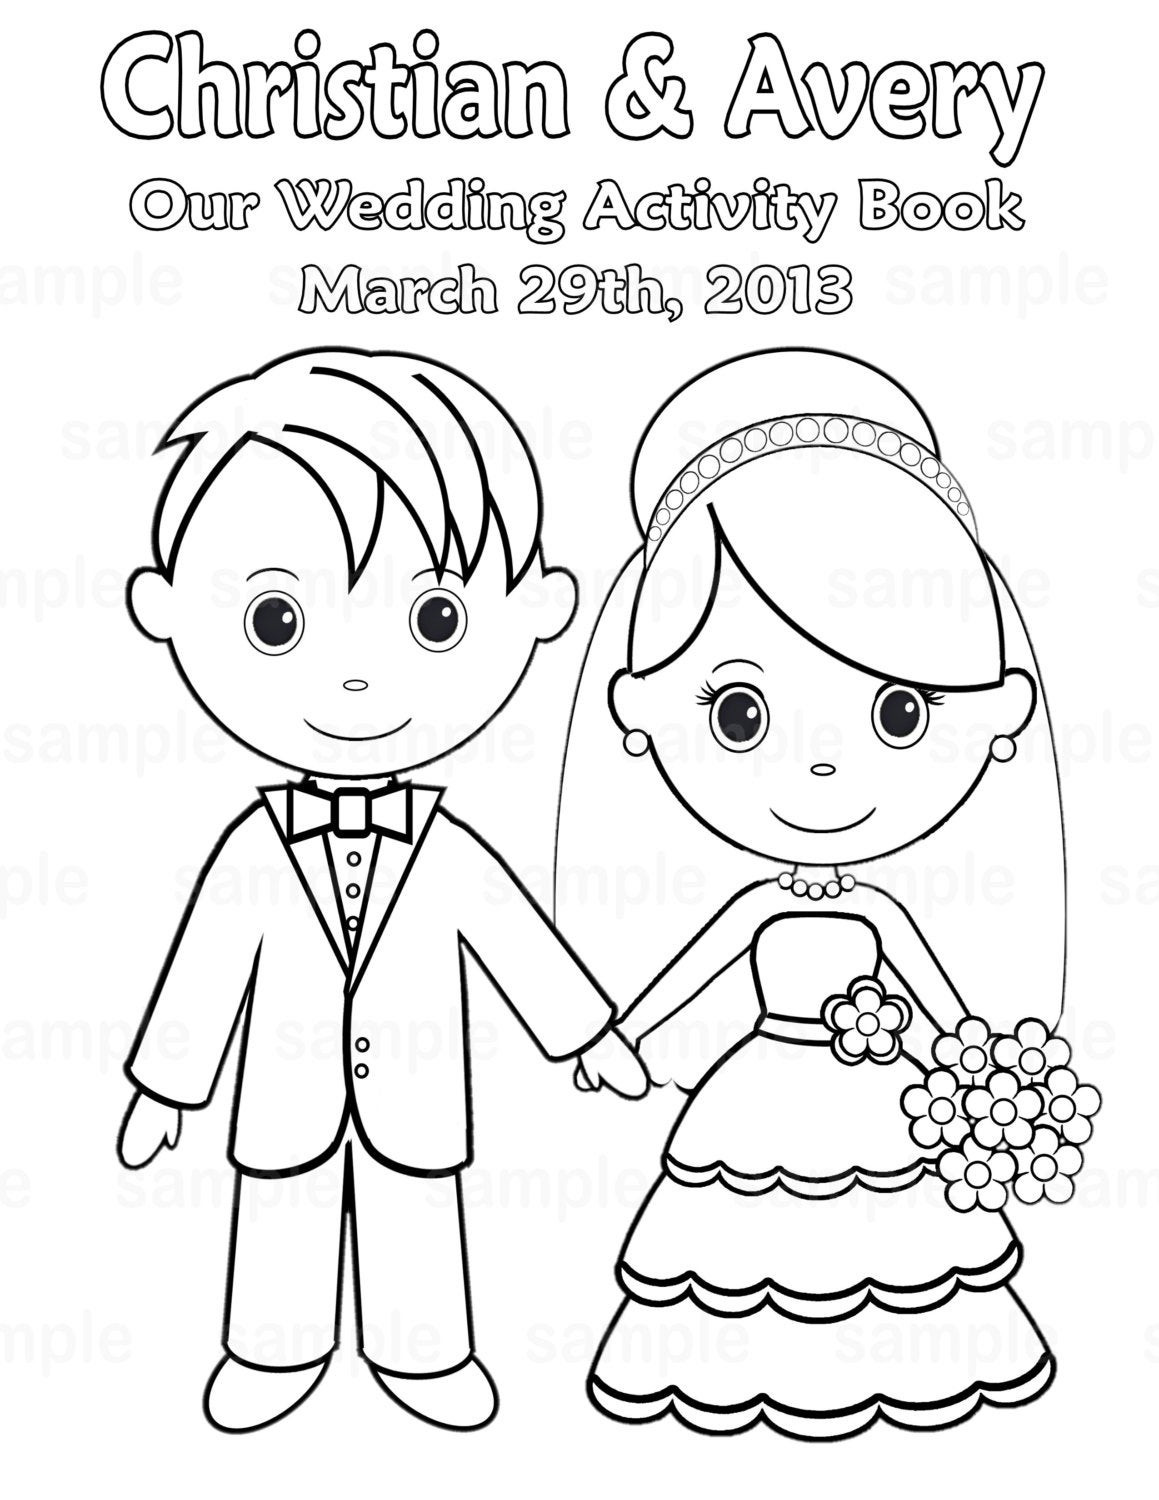 Printable Wedding Coloring Pages
 Printable Personalized Wedding coloring activity by